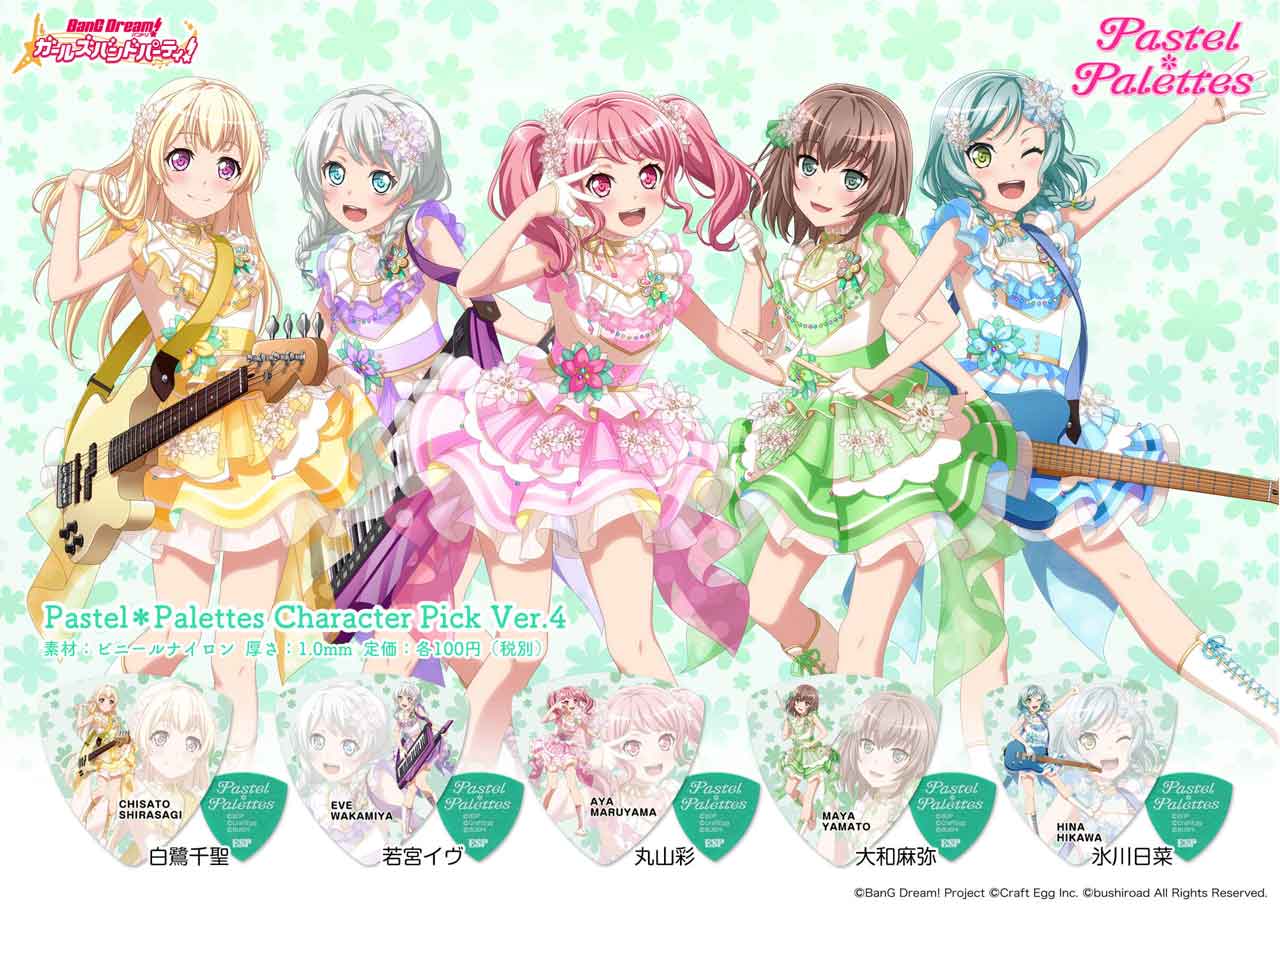 【ESP×BanG Dream!コラボピック】Pastel*Palettes Character Pick Ver.4 "氷川日菜"10枚セット（GBP HINA PASTEL PALETTES 4）